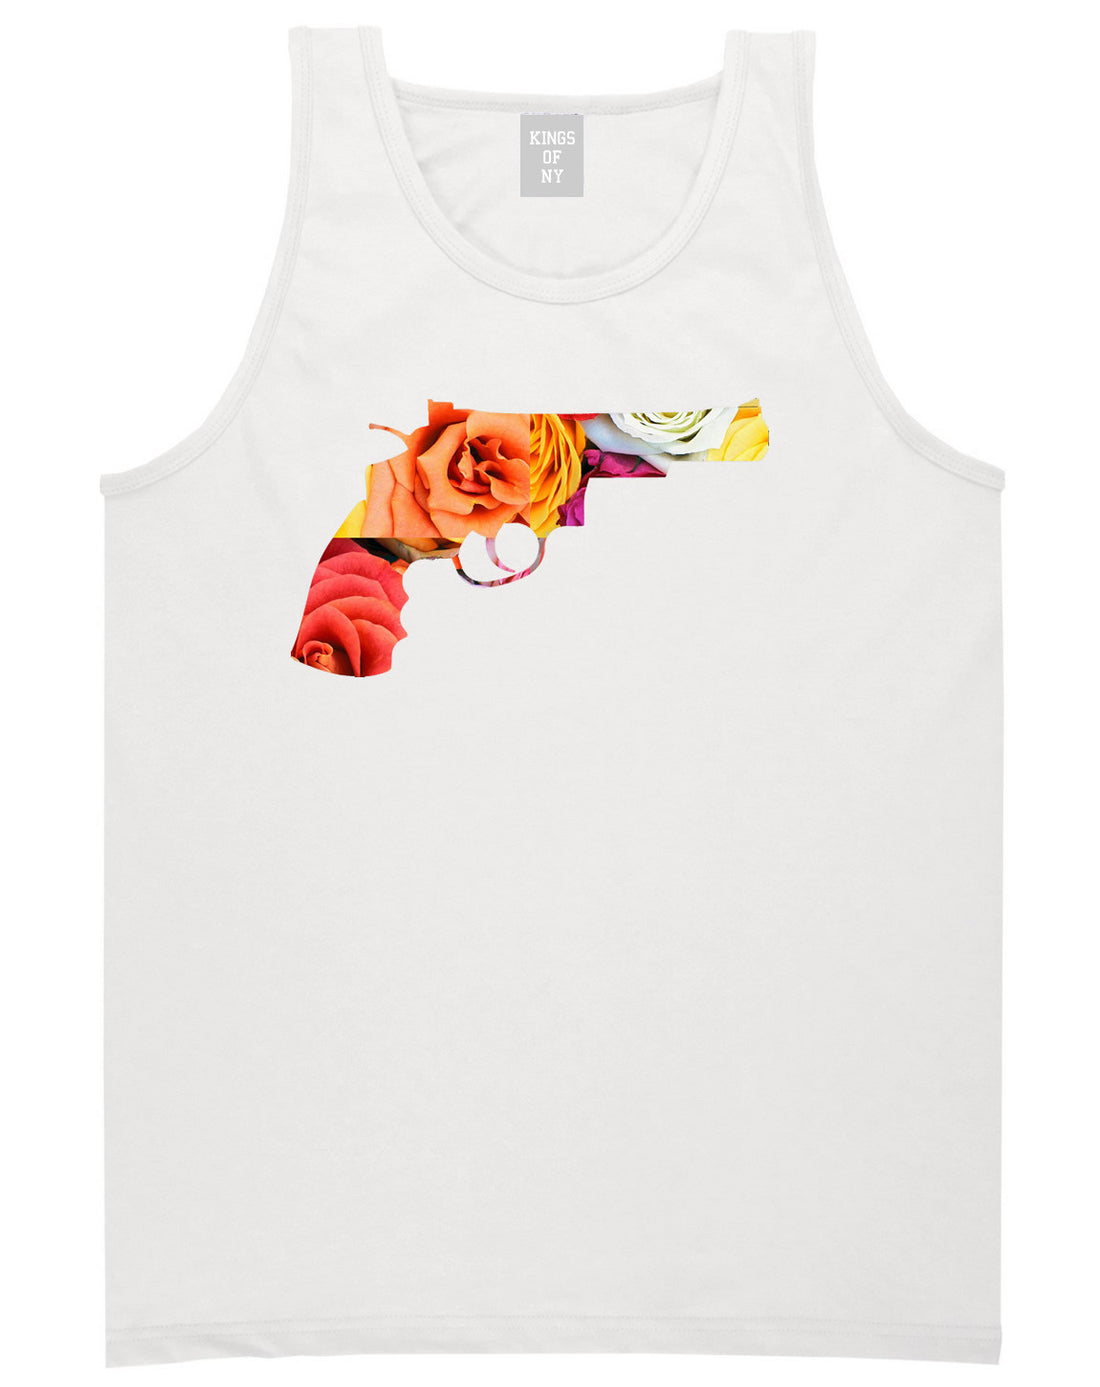 Floral Gun Flower Print Colt 45 Revolver Tank Top In White by Kings Of NY